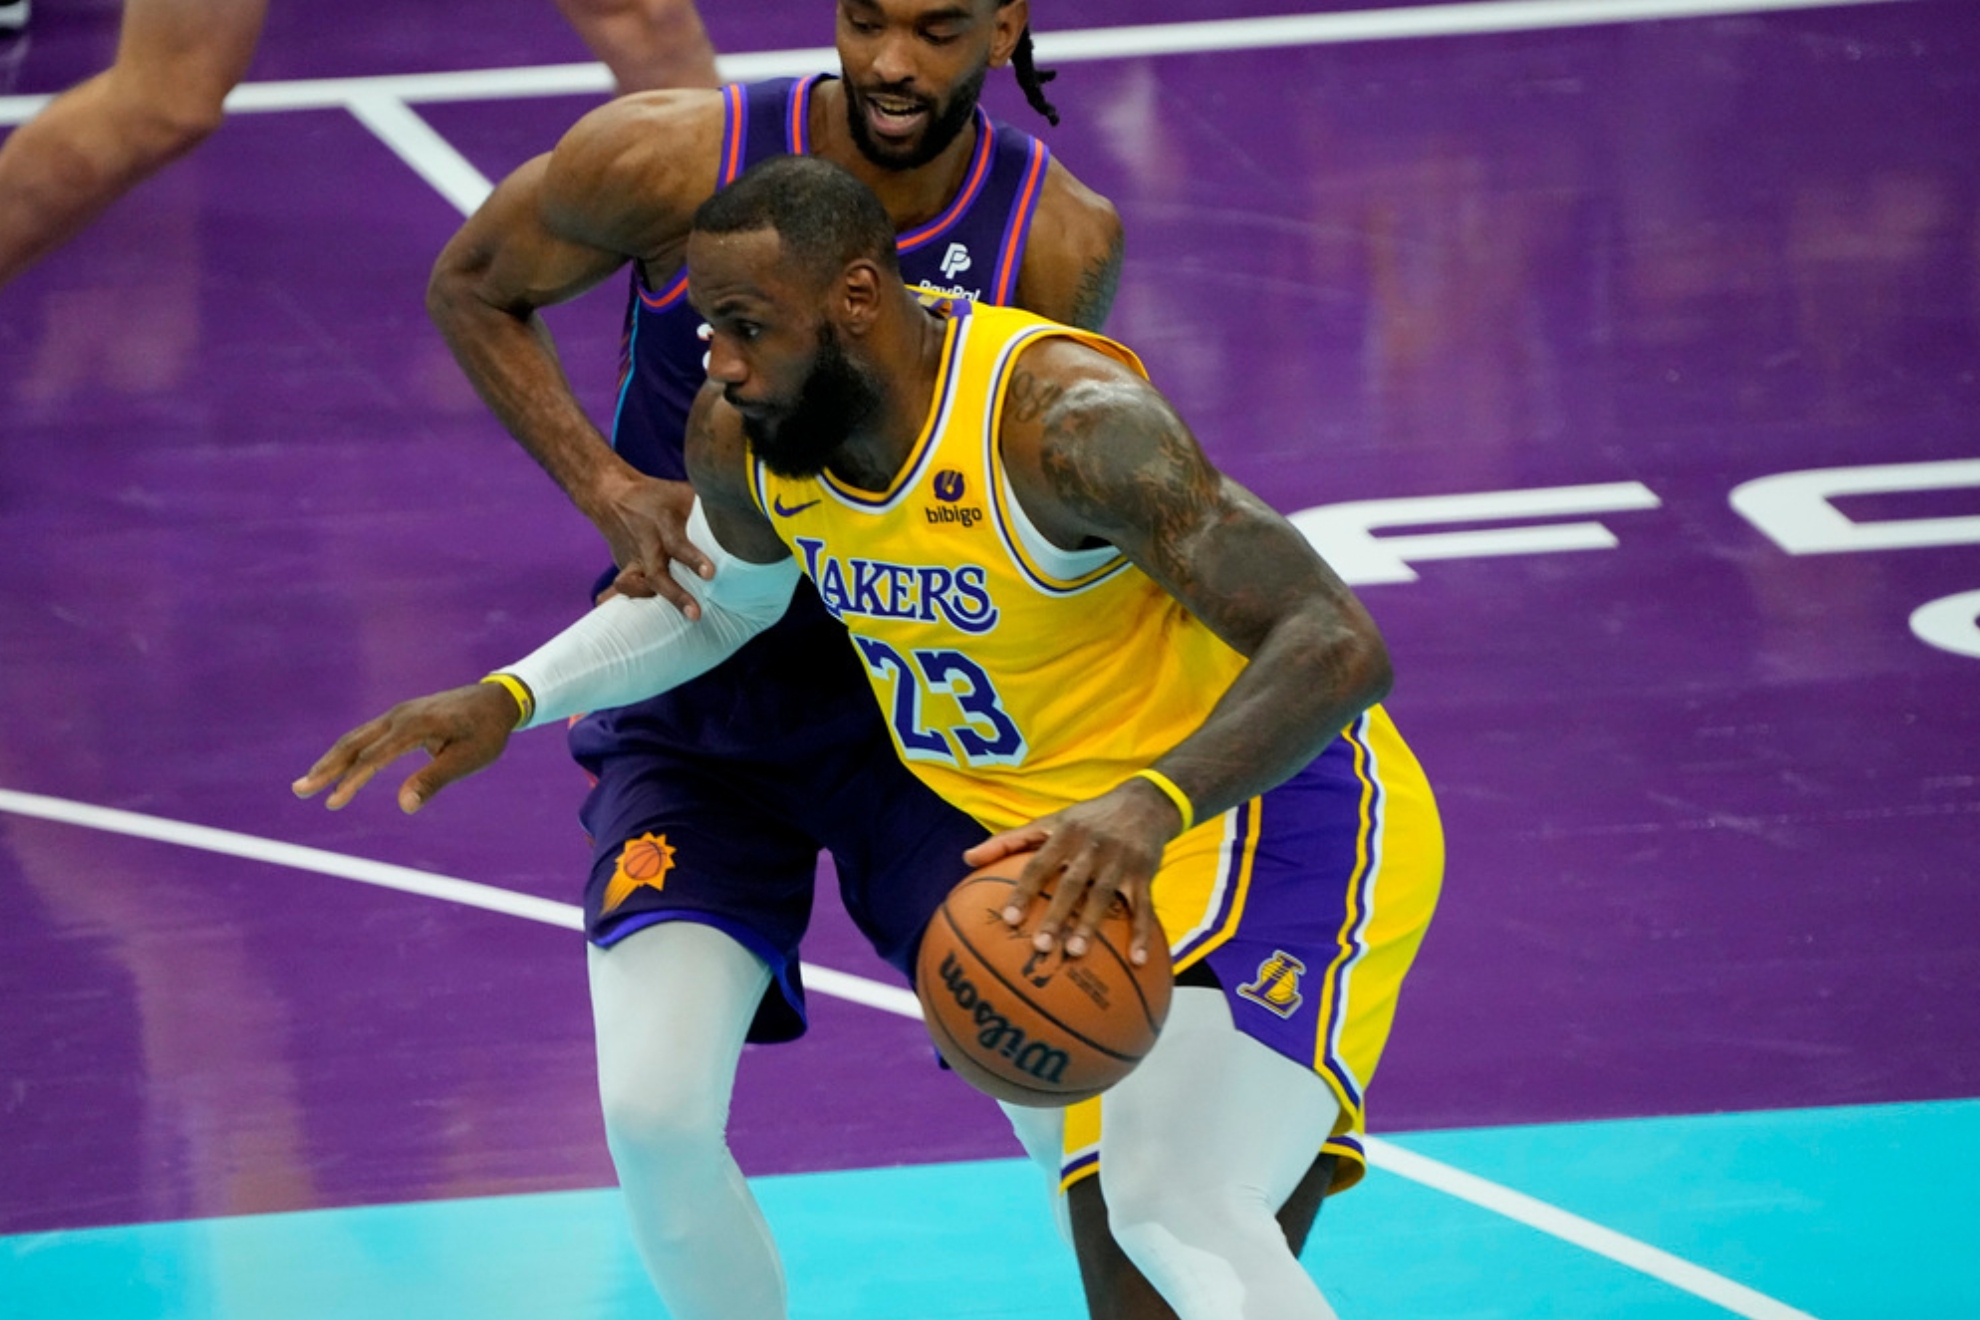 Lebron has been one of the dew bright spots for the Lakers so far